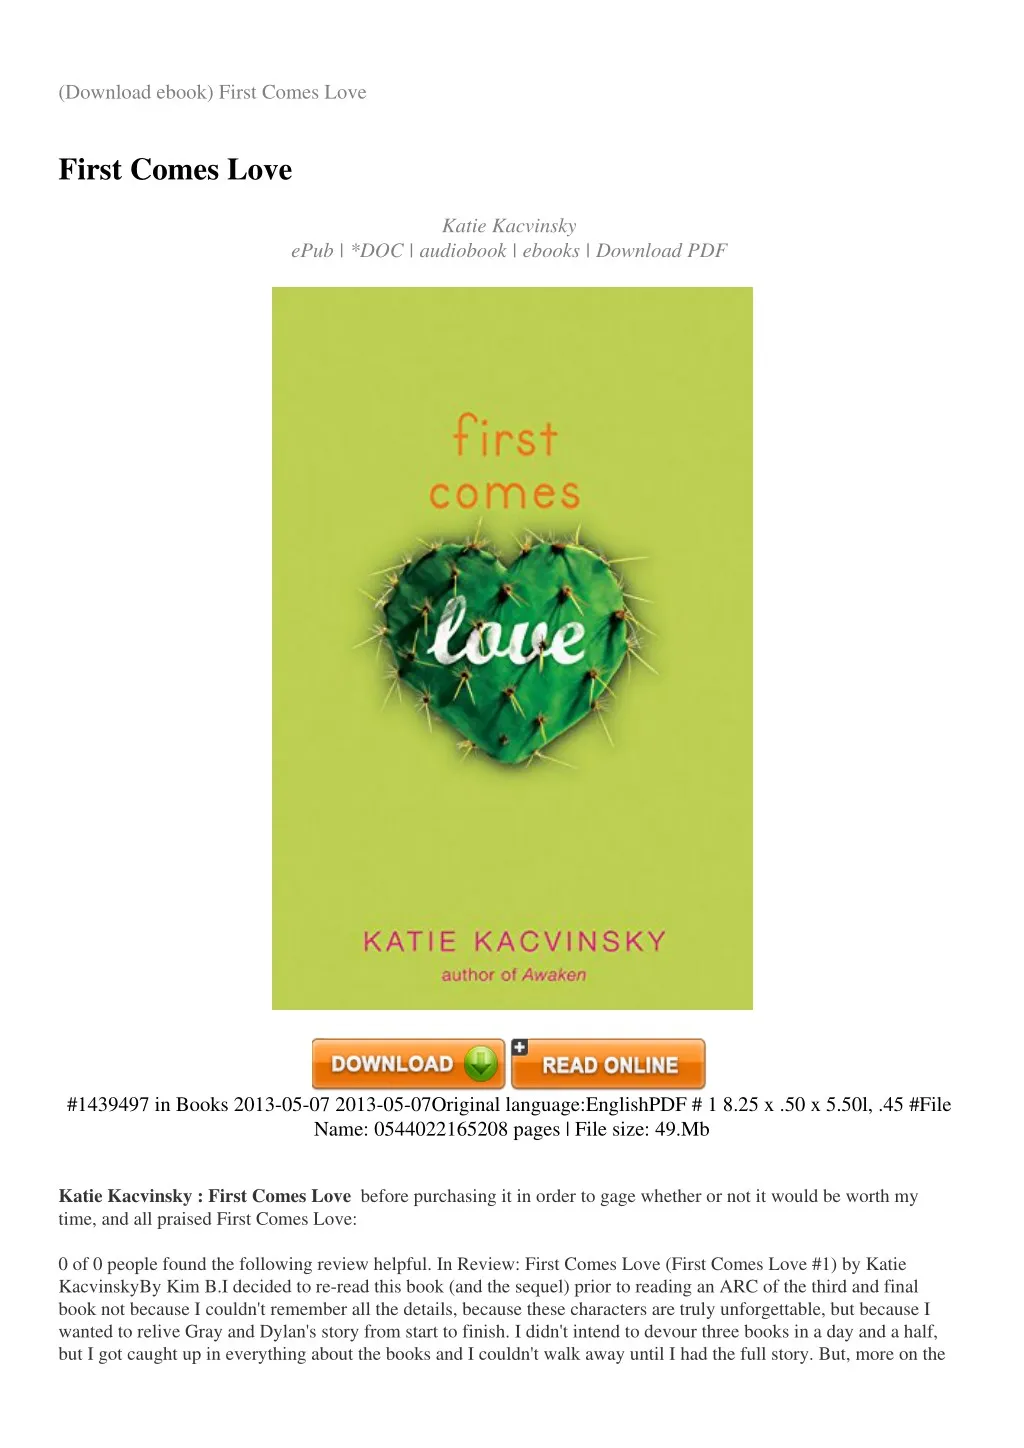 download ebook first comes love